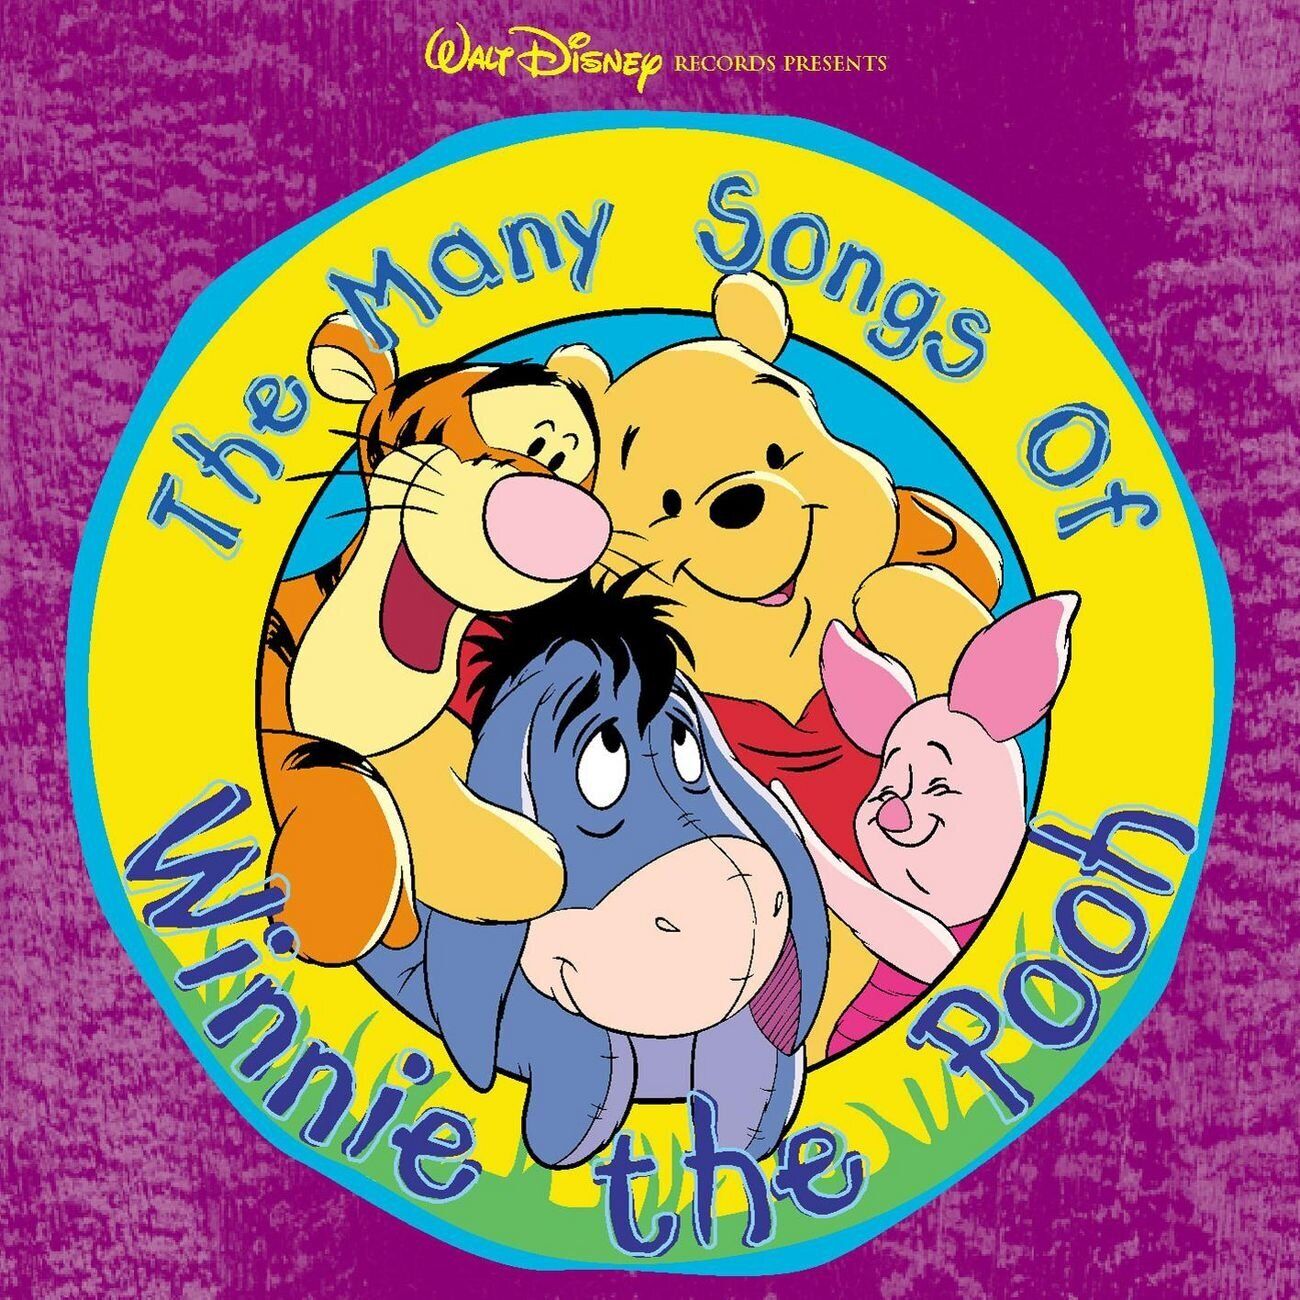 Winnie the Pooh Many Songs of Winnie the Pooh (CD)